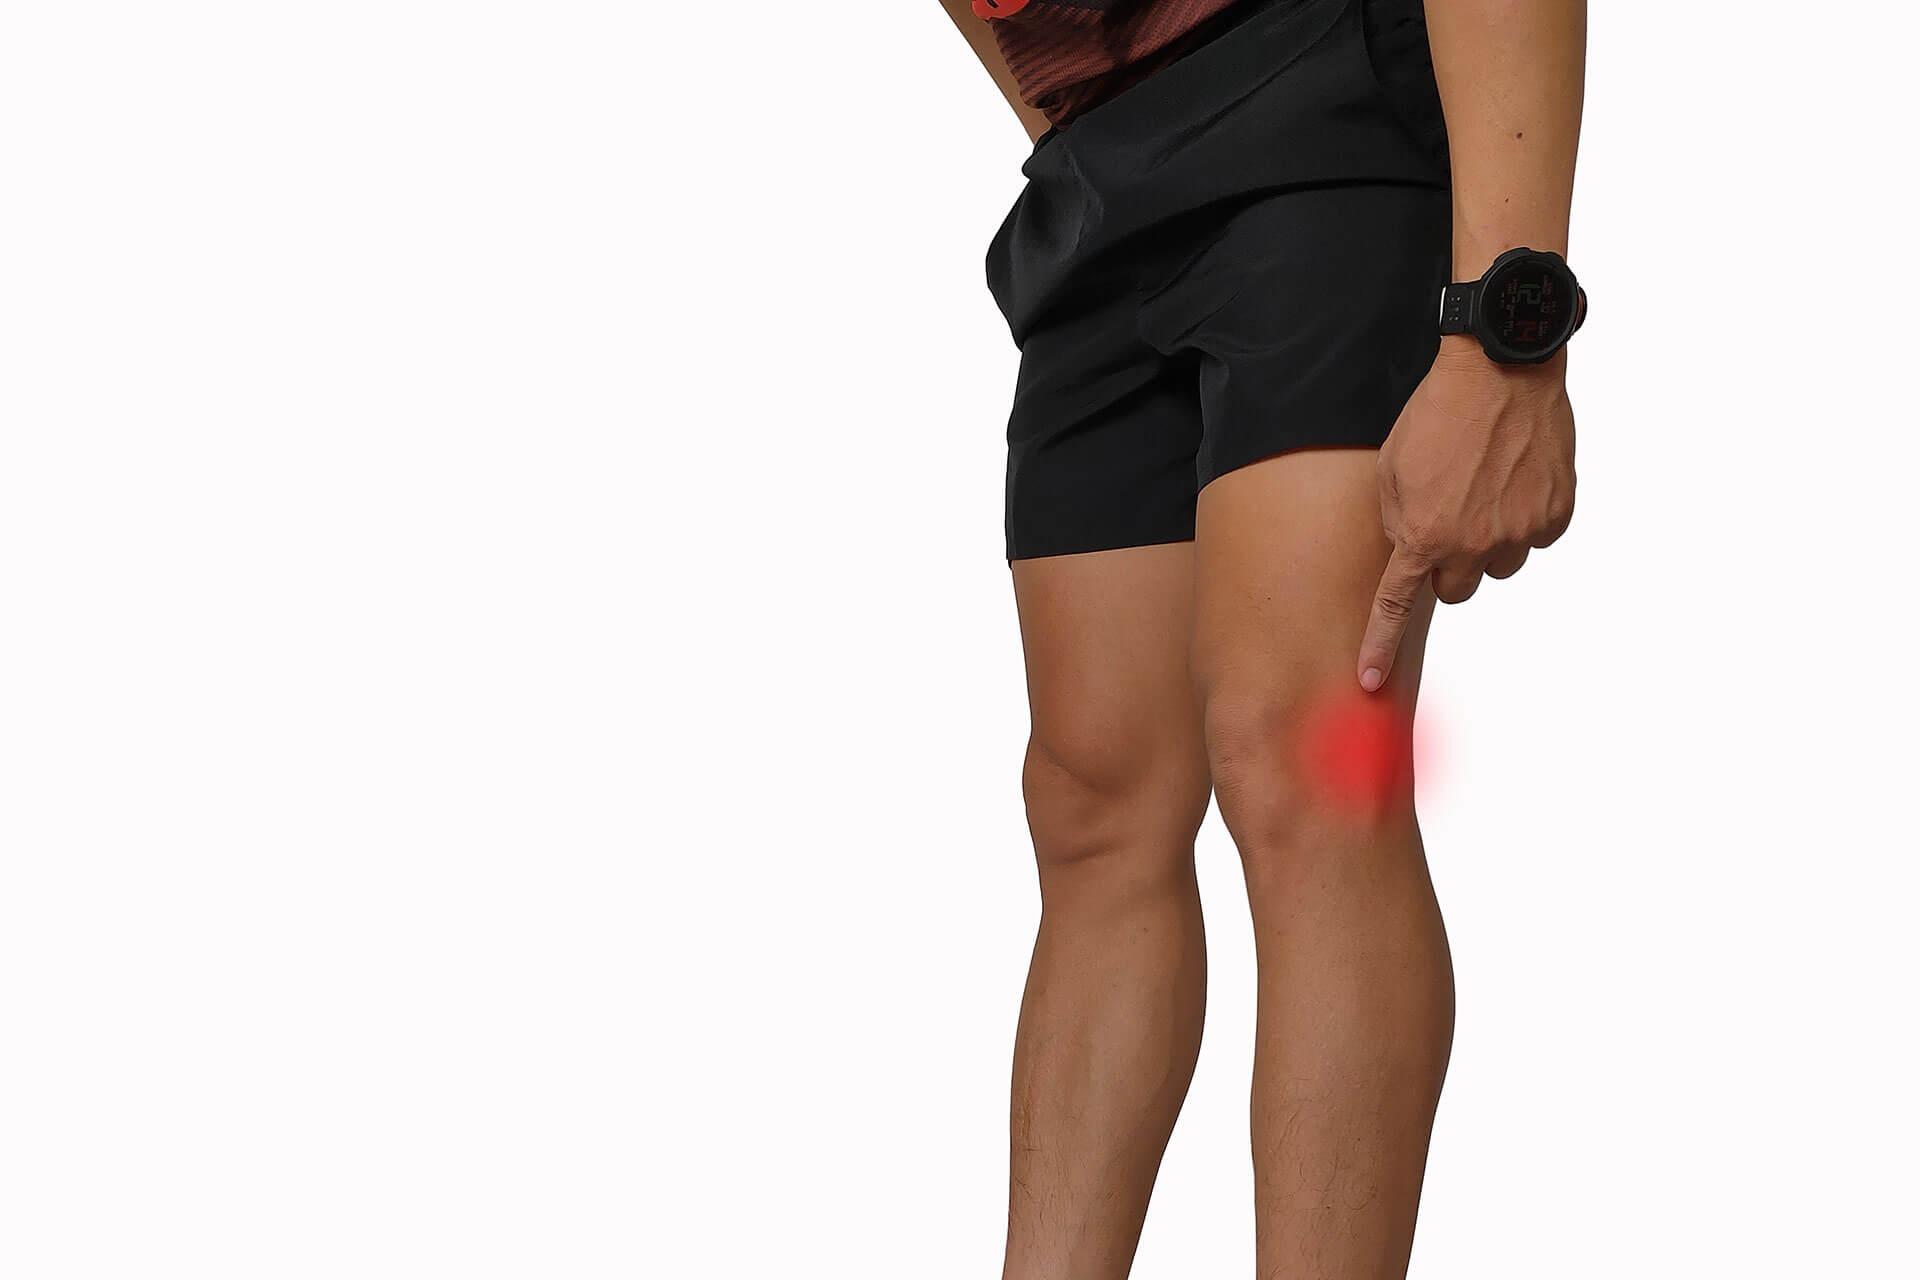 Iliotibial Band Syndrome - Knee - Conditions - Musculoskeletal - What We  Treat 